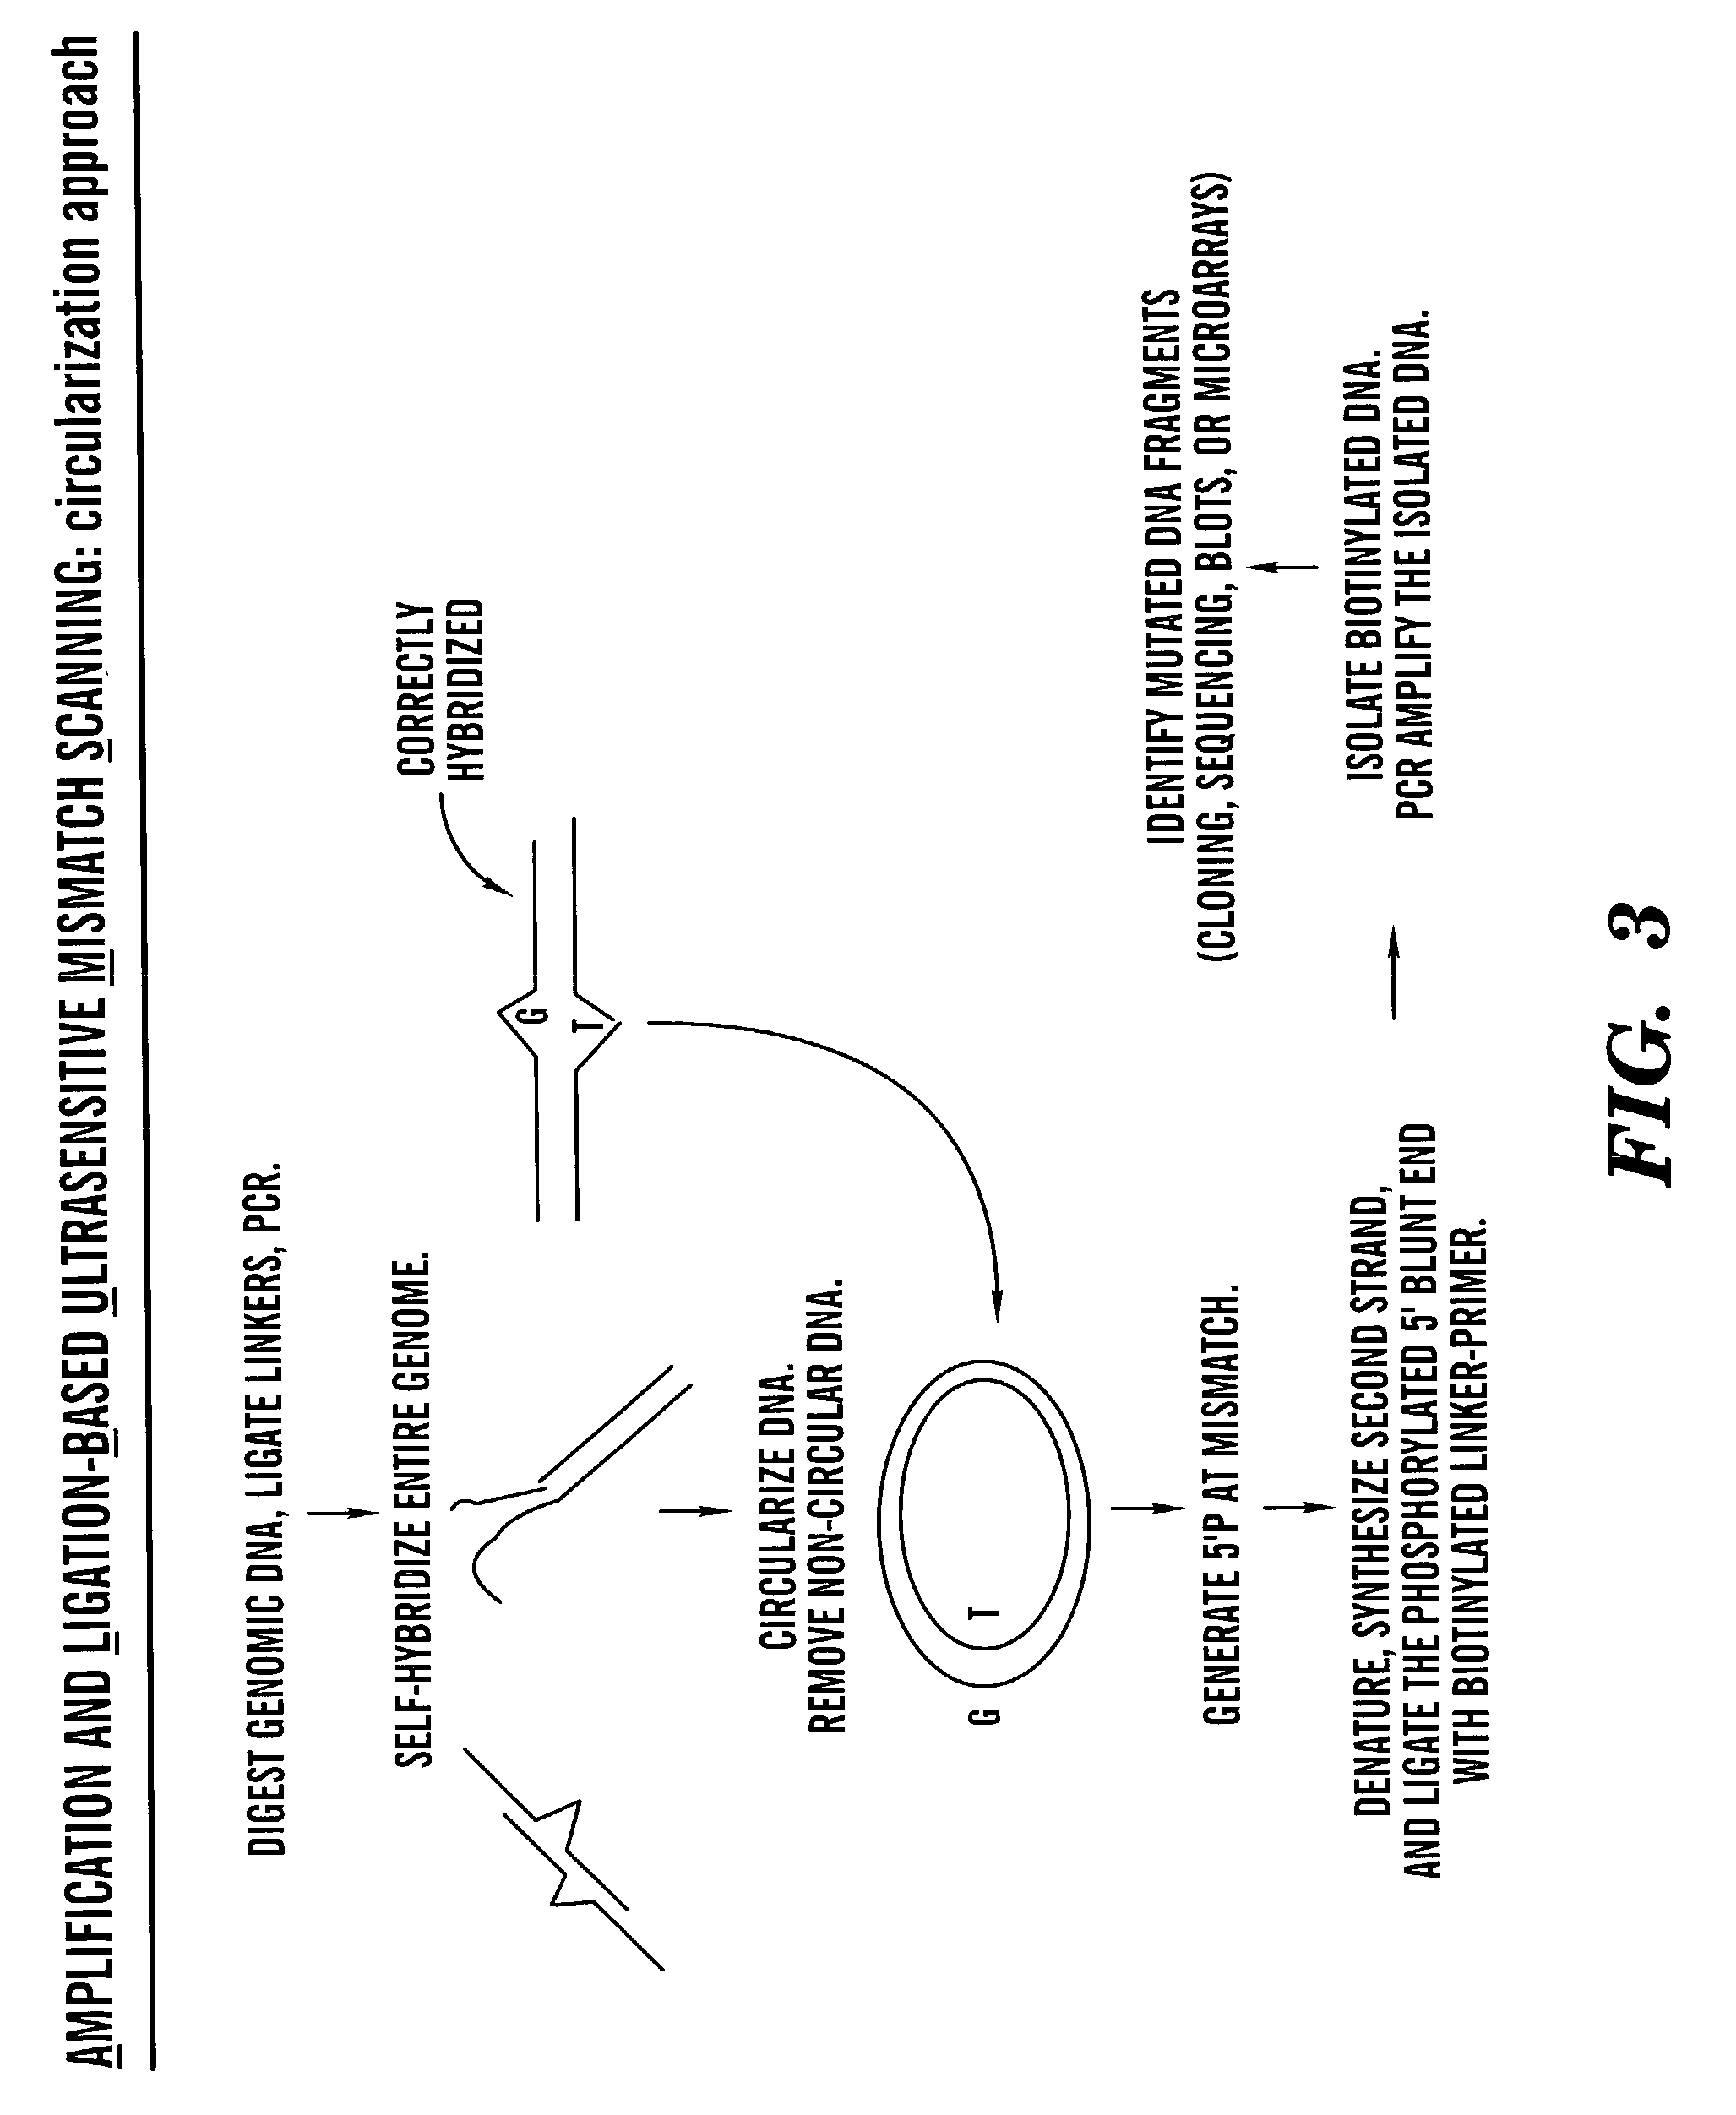 Methods for rapid screening of polymorphisms, mutations and methylation